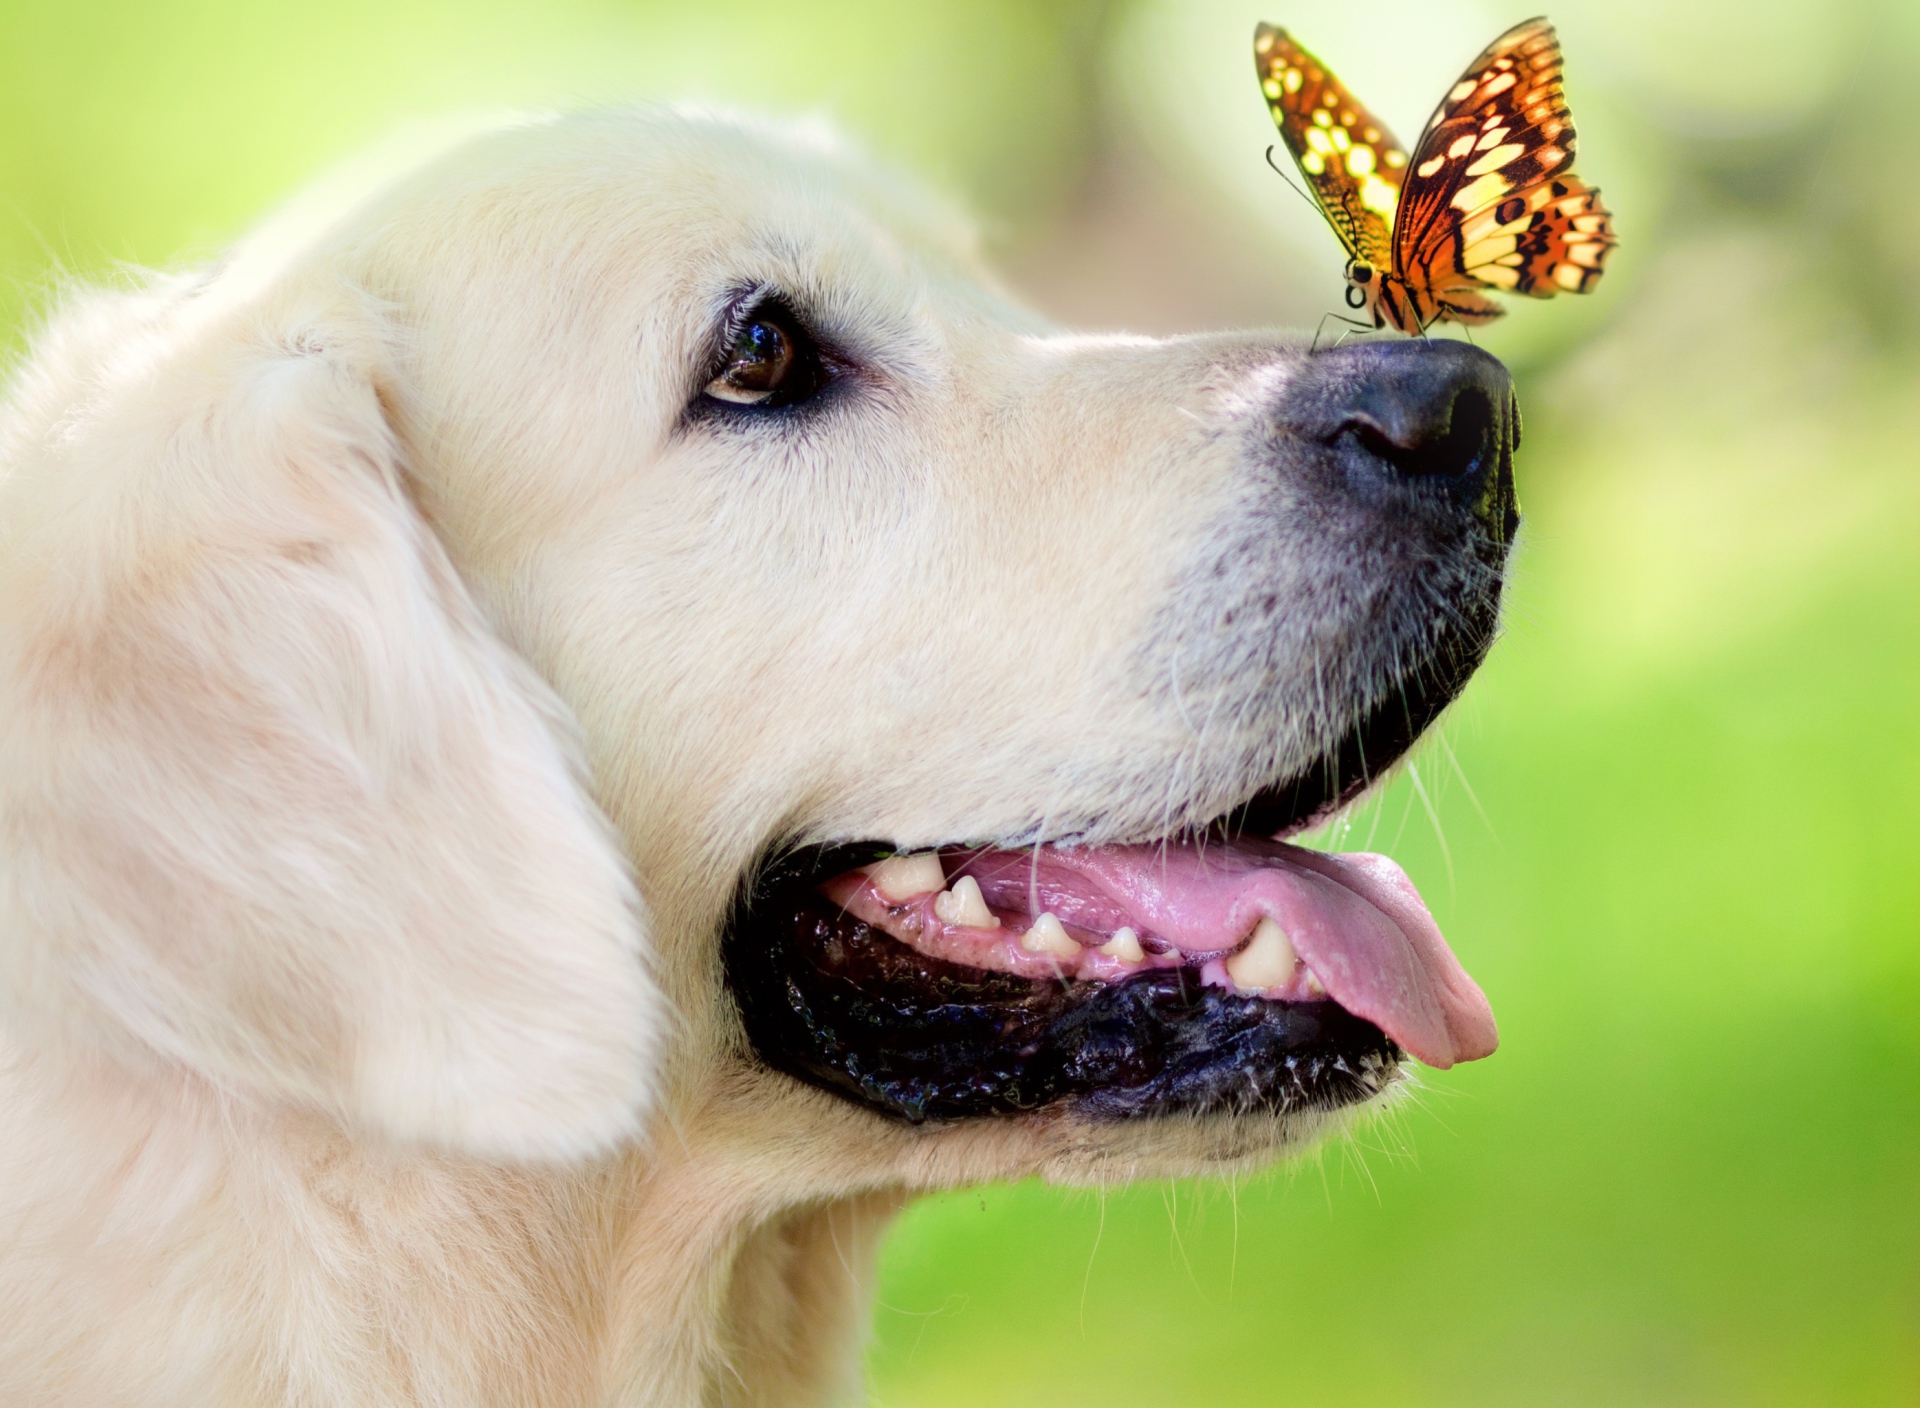 Butterfly On Dog's Nose screenshot #1 1920x1408